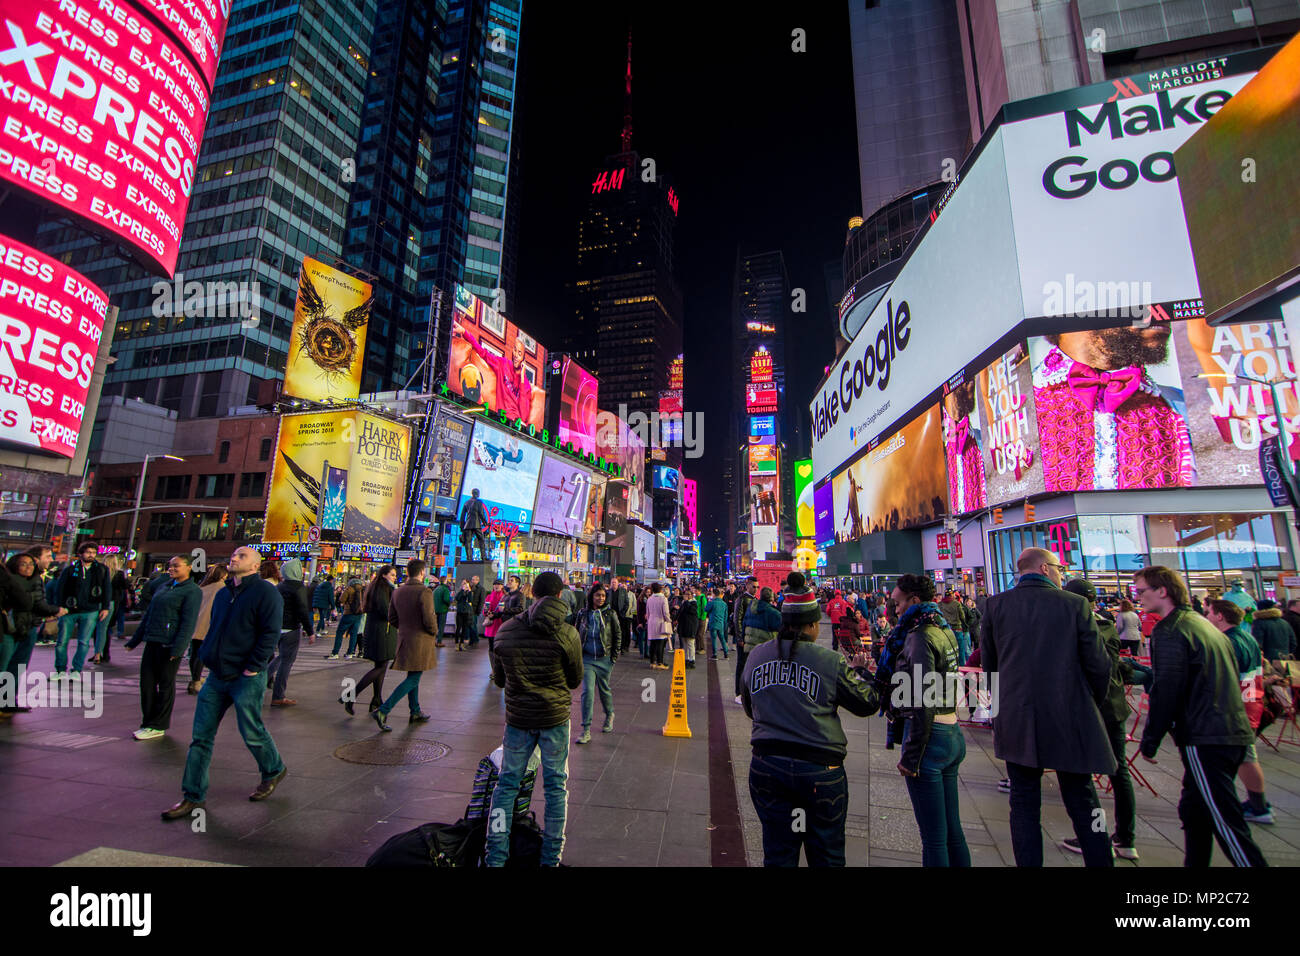 New York, US - March 30, 2018: View of people visiting the famous Times Square in New York at night Stock Photo